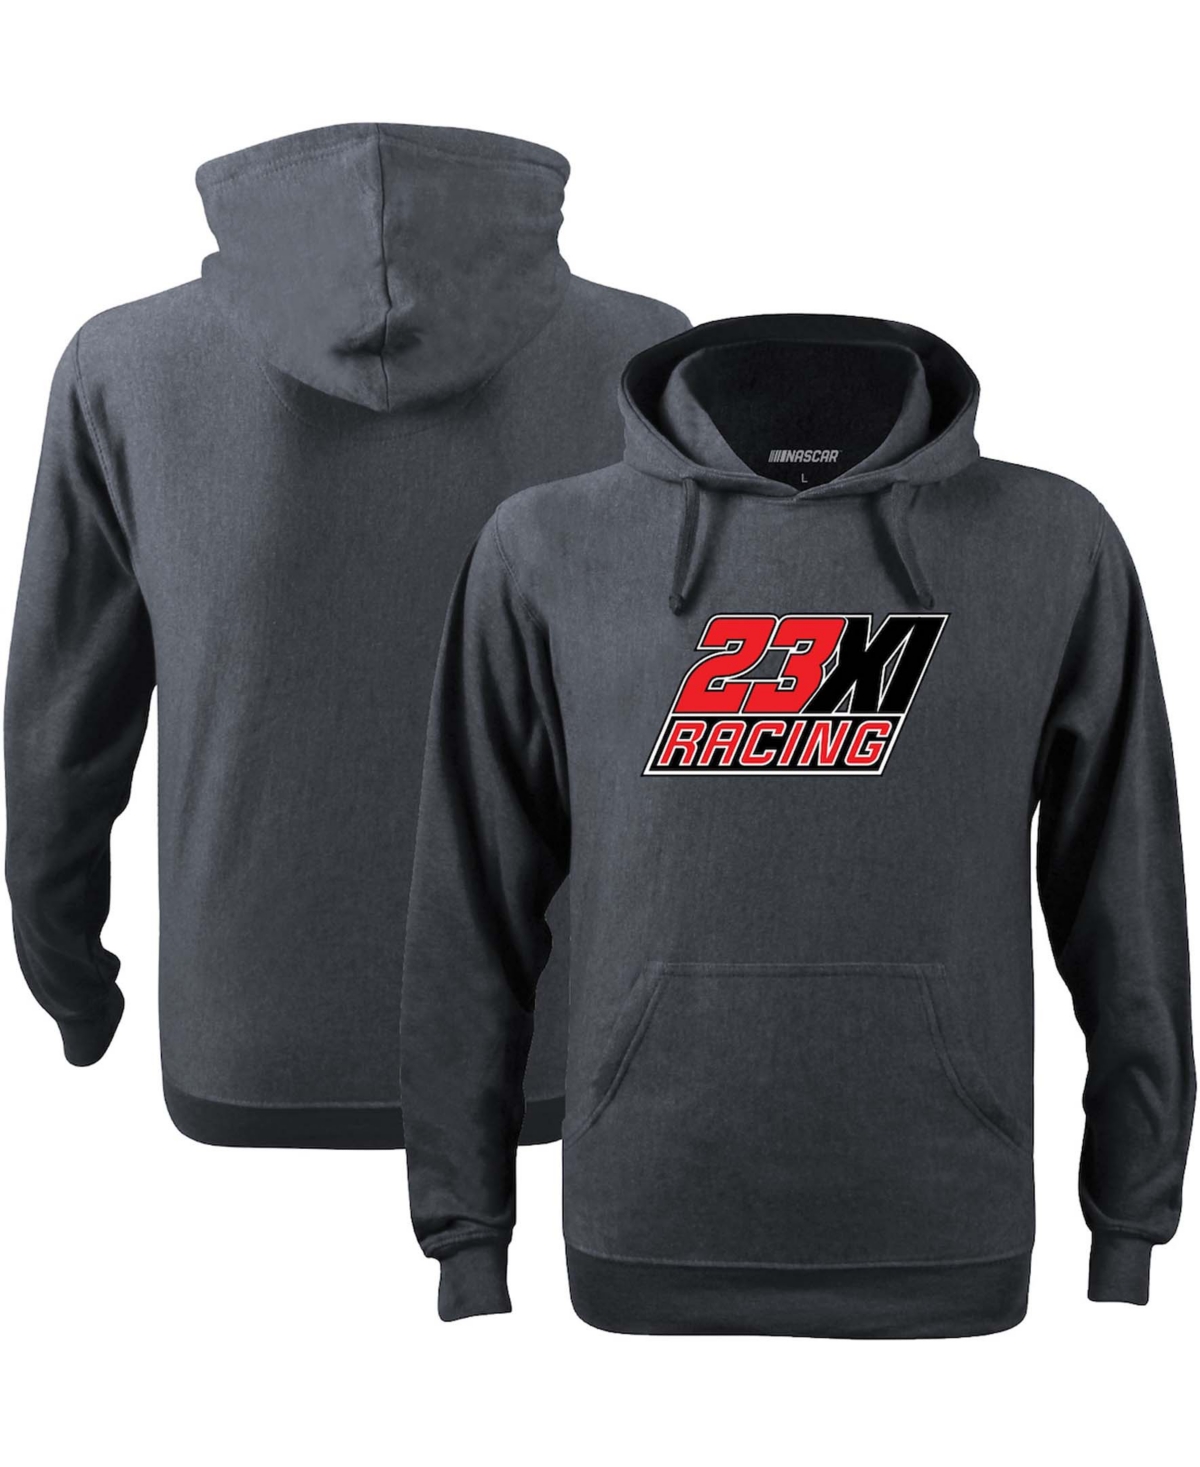 Checkered Flag Sports Men's Heather Charcoal 23XI Racing Graphic 1-Spot Pullover Hoodie